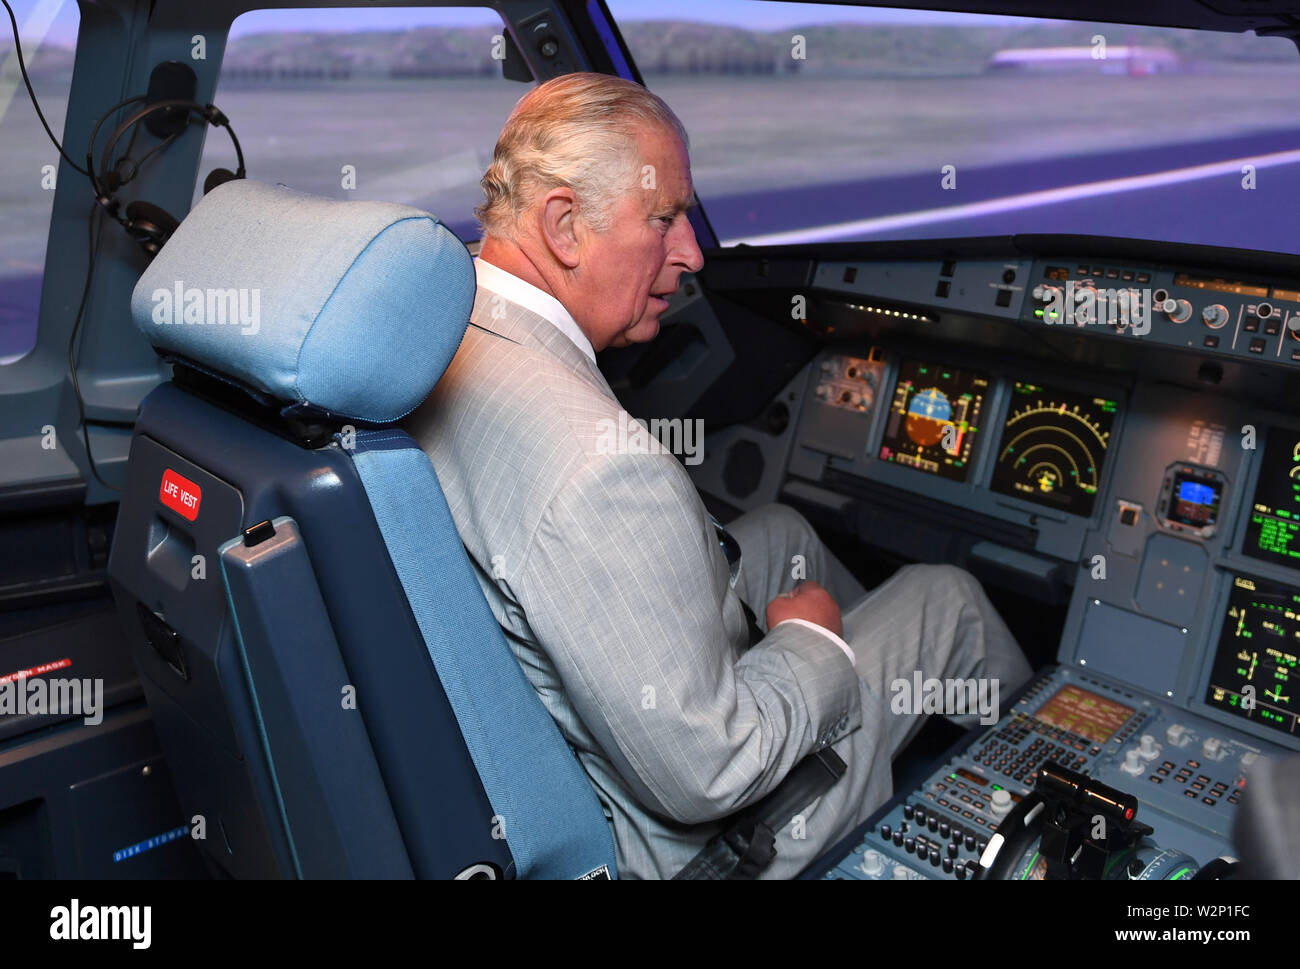 The Prince of Wales takes part in a pre-flight briefing and simulation during a visit to officially open the L3Harris Technologies' London Training Centre in Crawley, West Sussex. Stock Photo